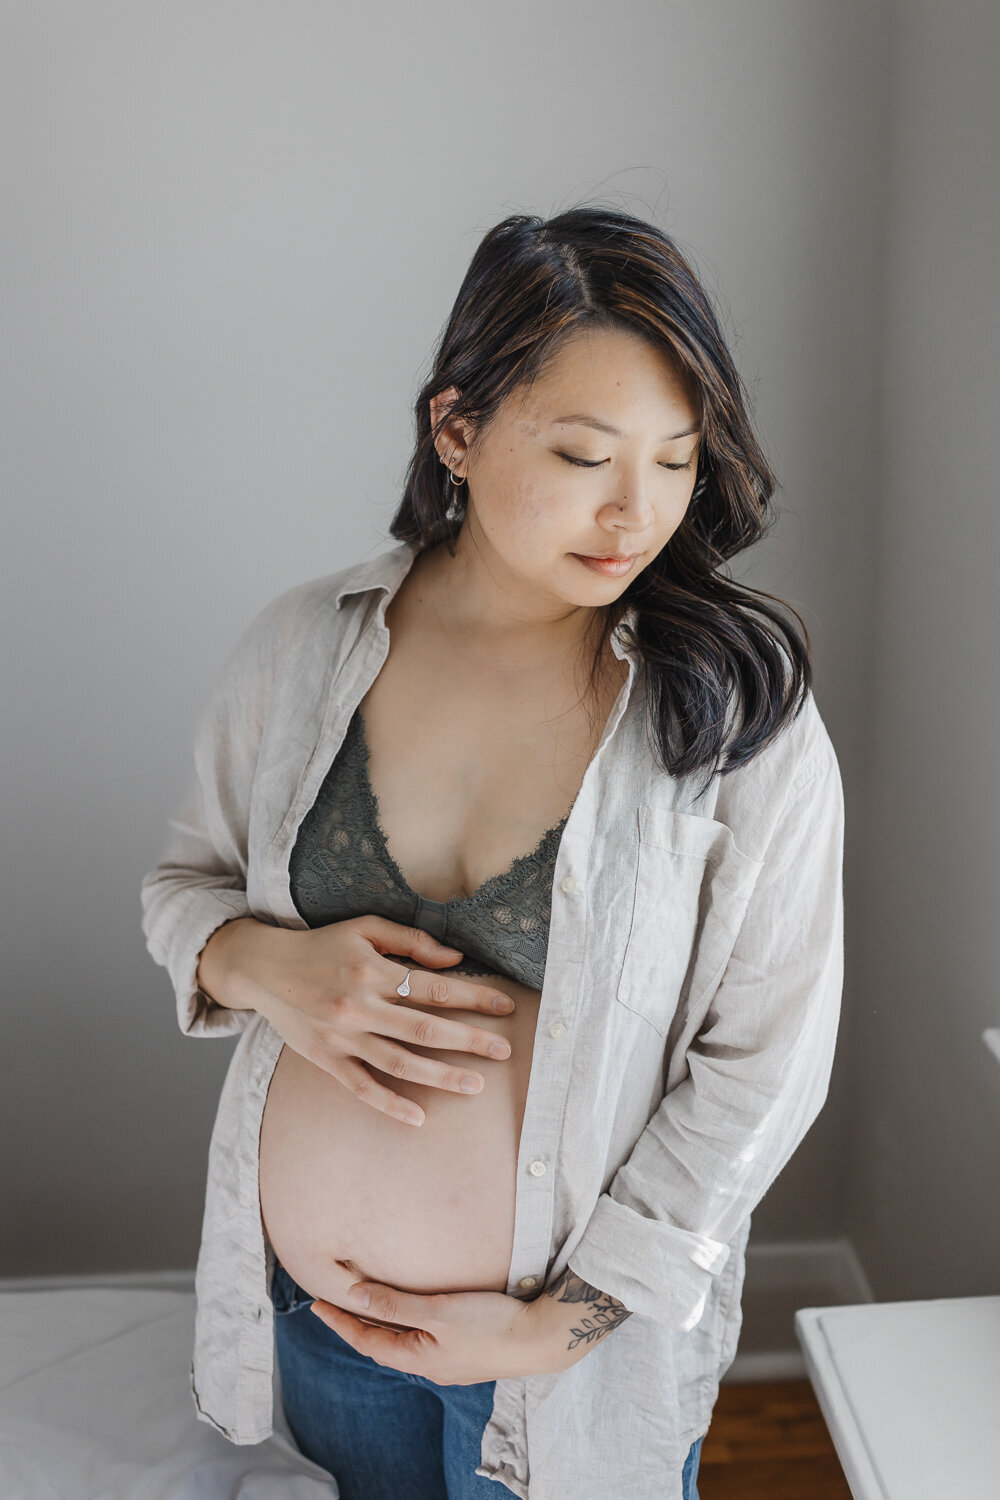 Pregnant Asian woman wearing jeans and a green lace bralette  and beige shirt